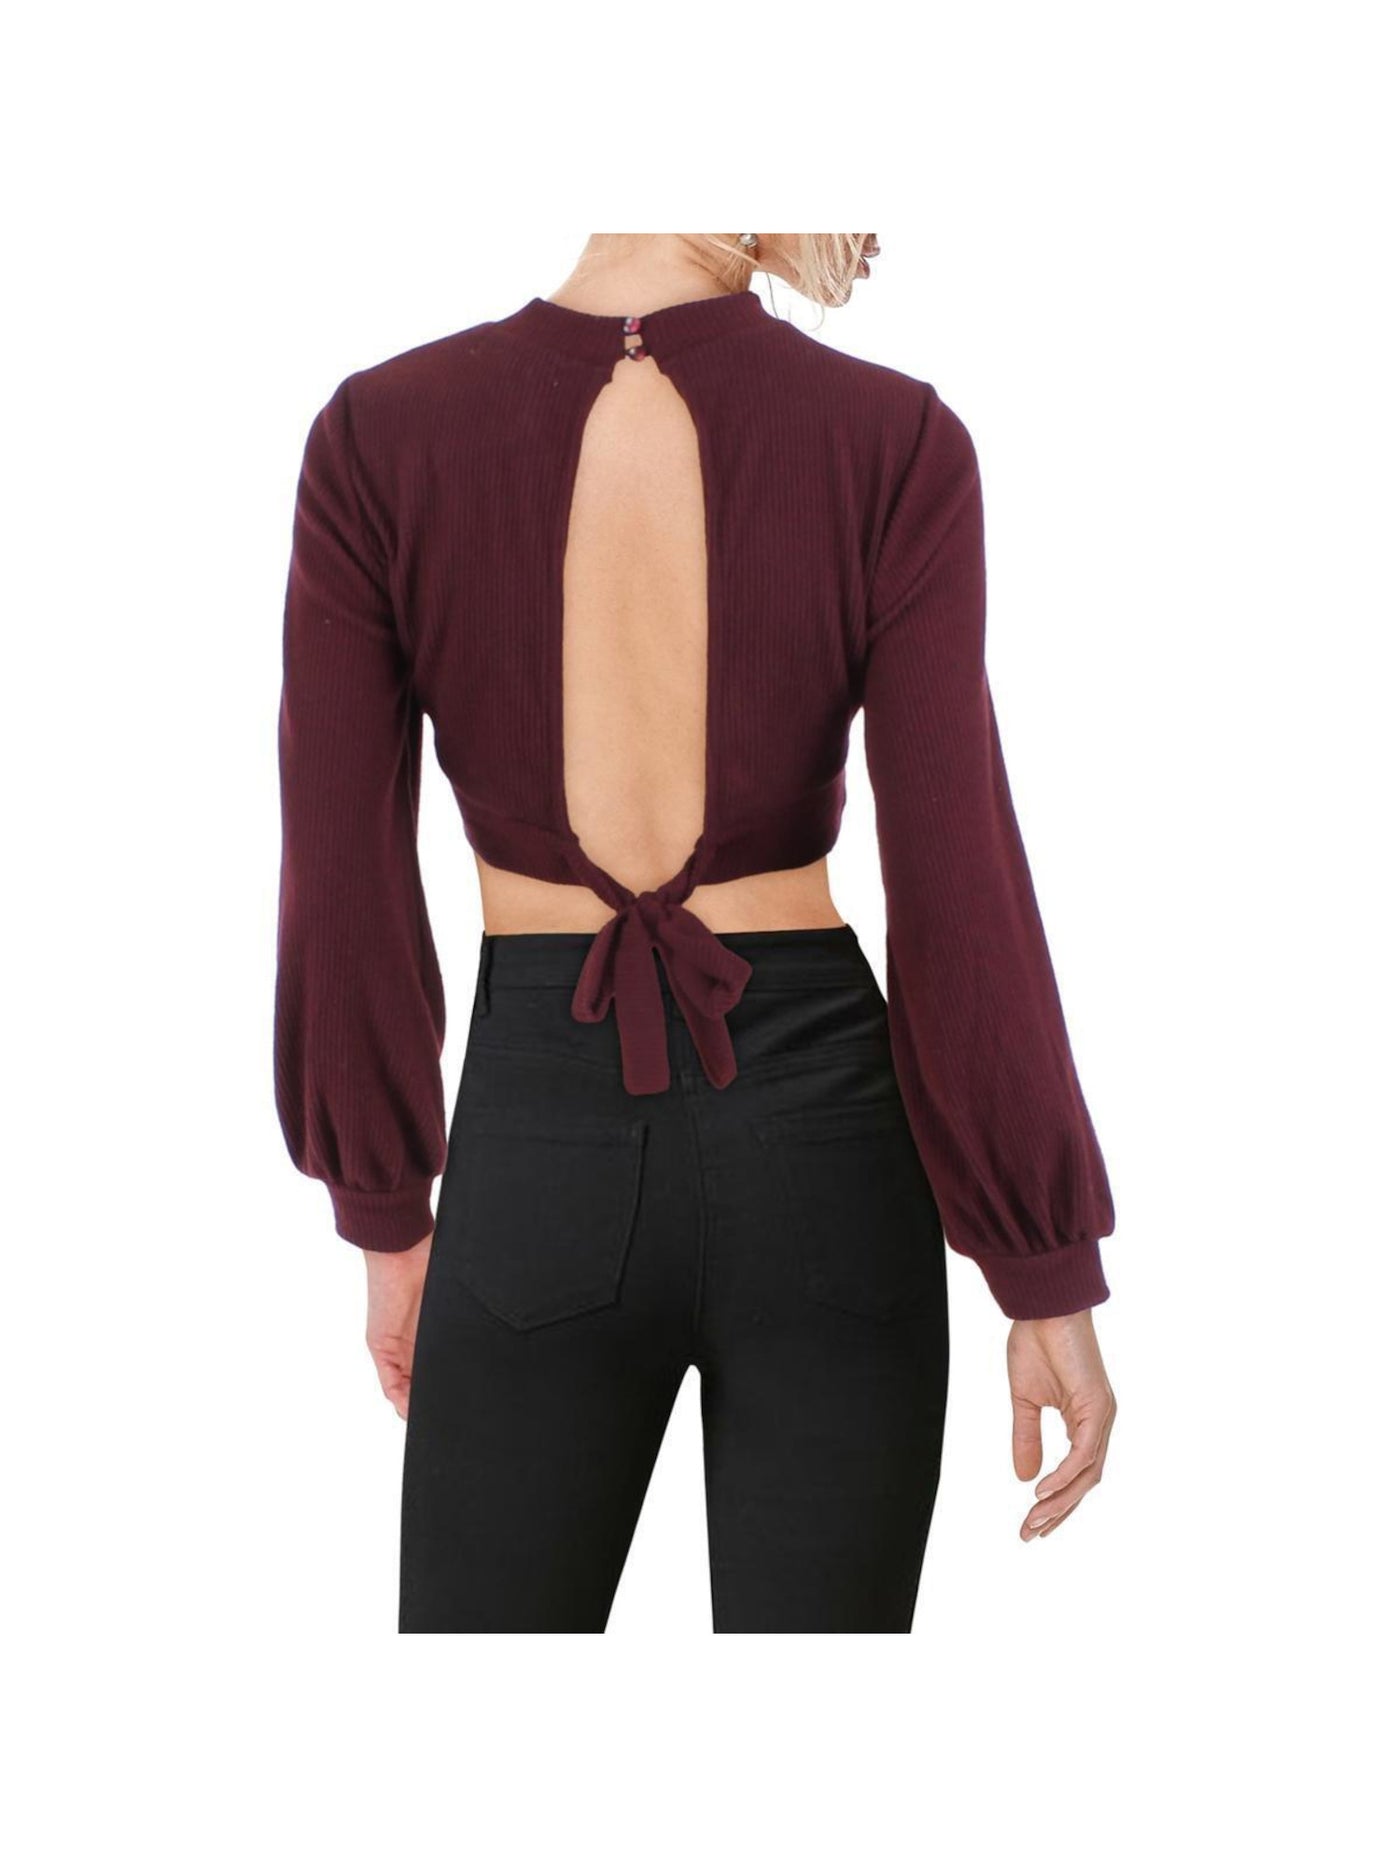 ALMOST FAMOUS Womens Burgundy Cut Out Ribbed Button Neck Open Tie Back Balloon Sleeve Mock Neck Crop Top Sweater Juniors L